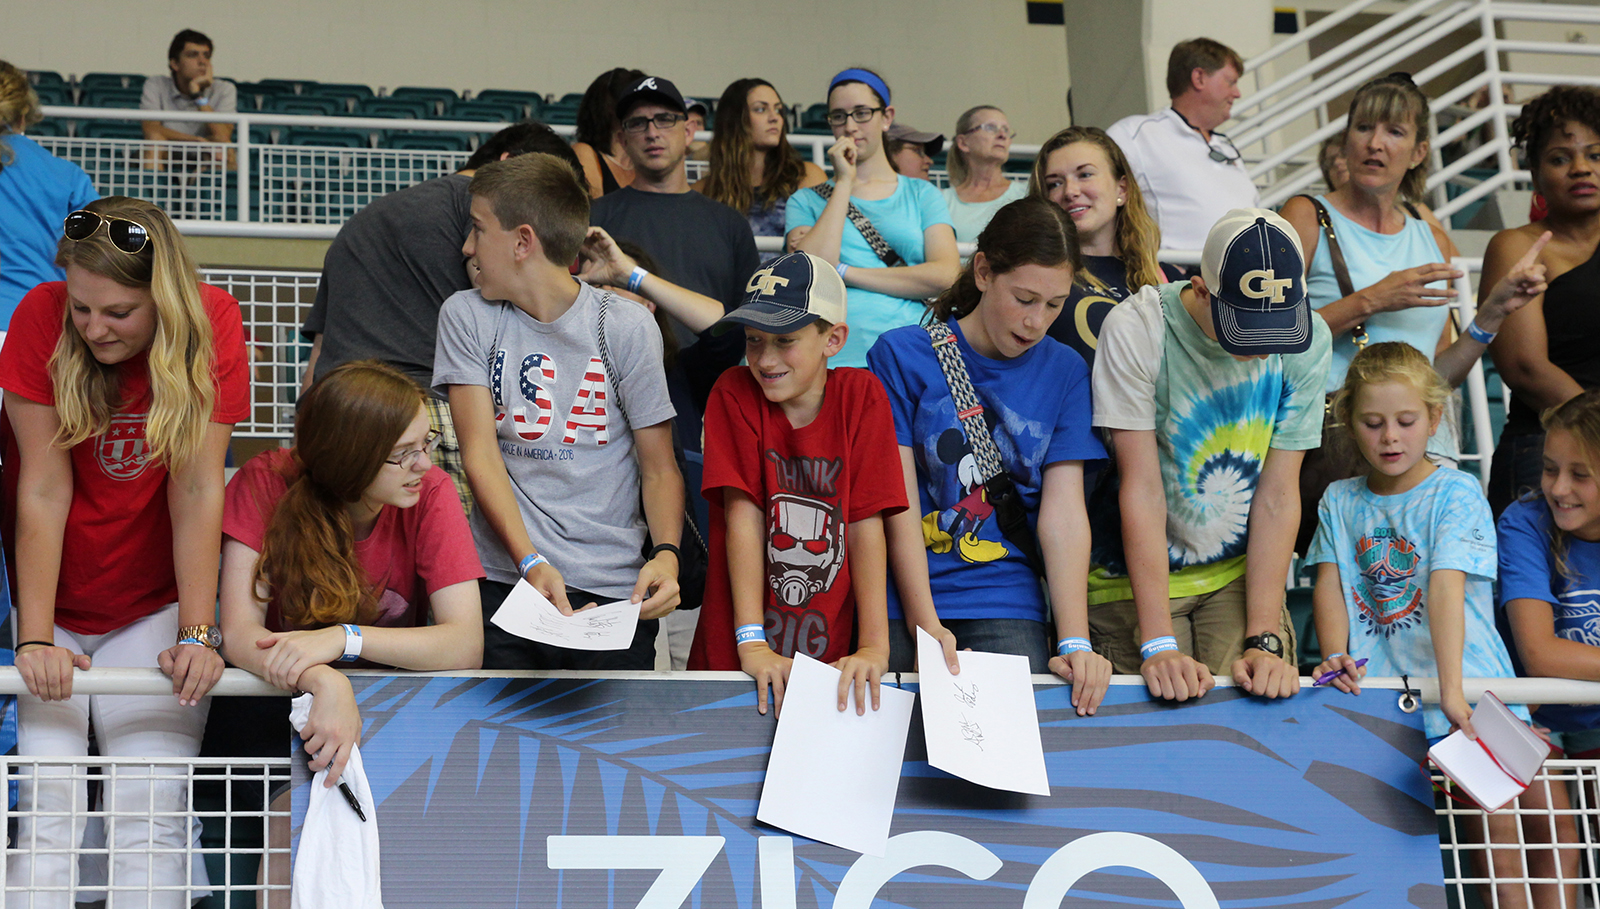 Fans wait for autographs at an open Olympic swimming practice at Georgia Tech's McAuley Aquatic Center on July 30, 2016